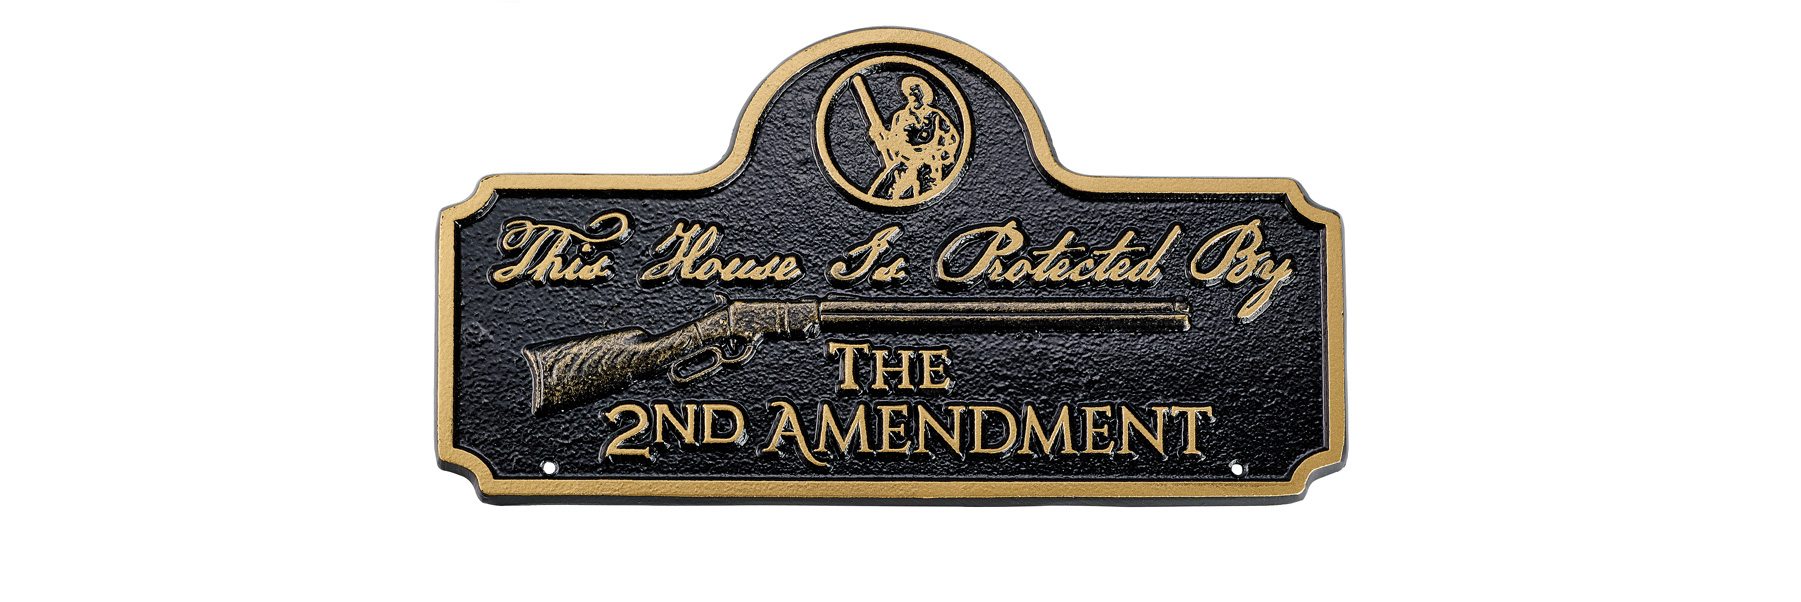 Henry 2nd Amendment Plaque (Lawn or Wall mount)